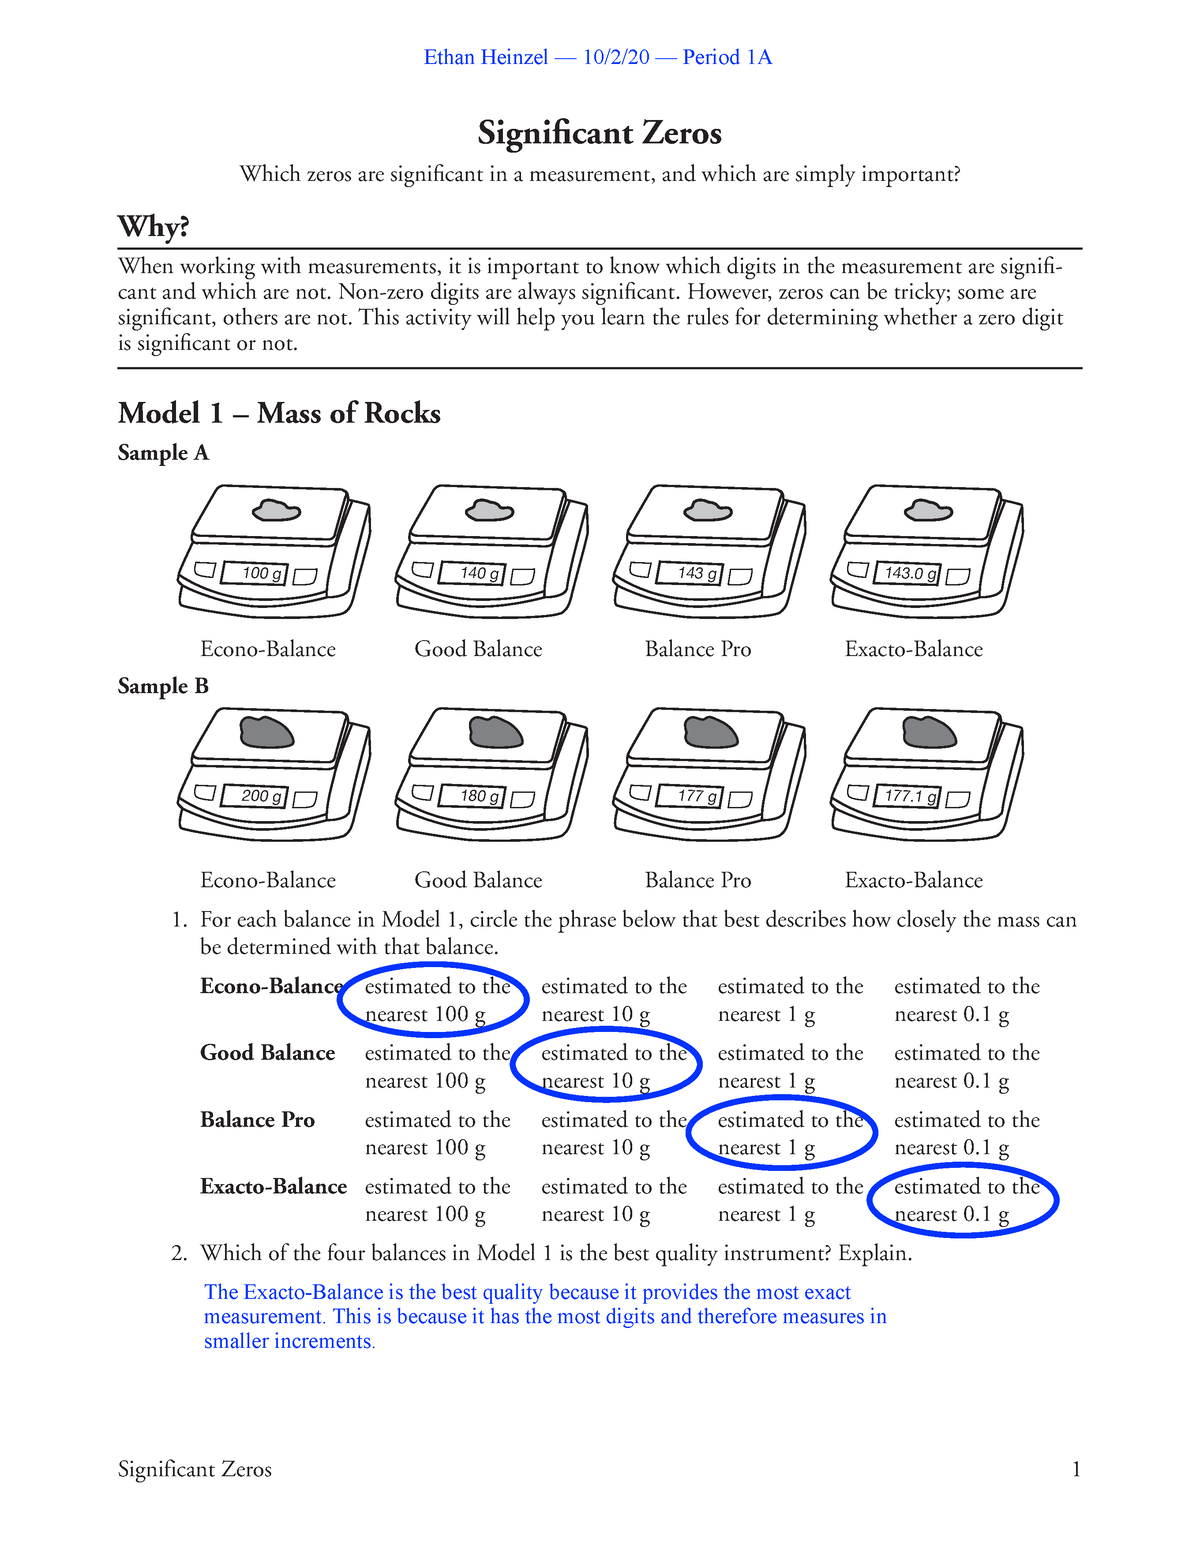 significant-zeros-worksheet-answers-significant-zeros-1-significant-zeros-which-zeros-are